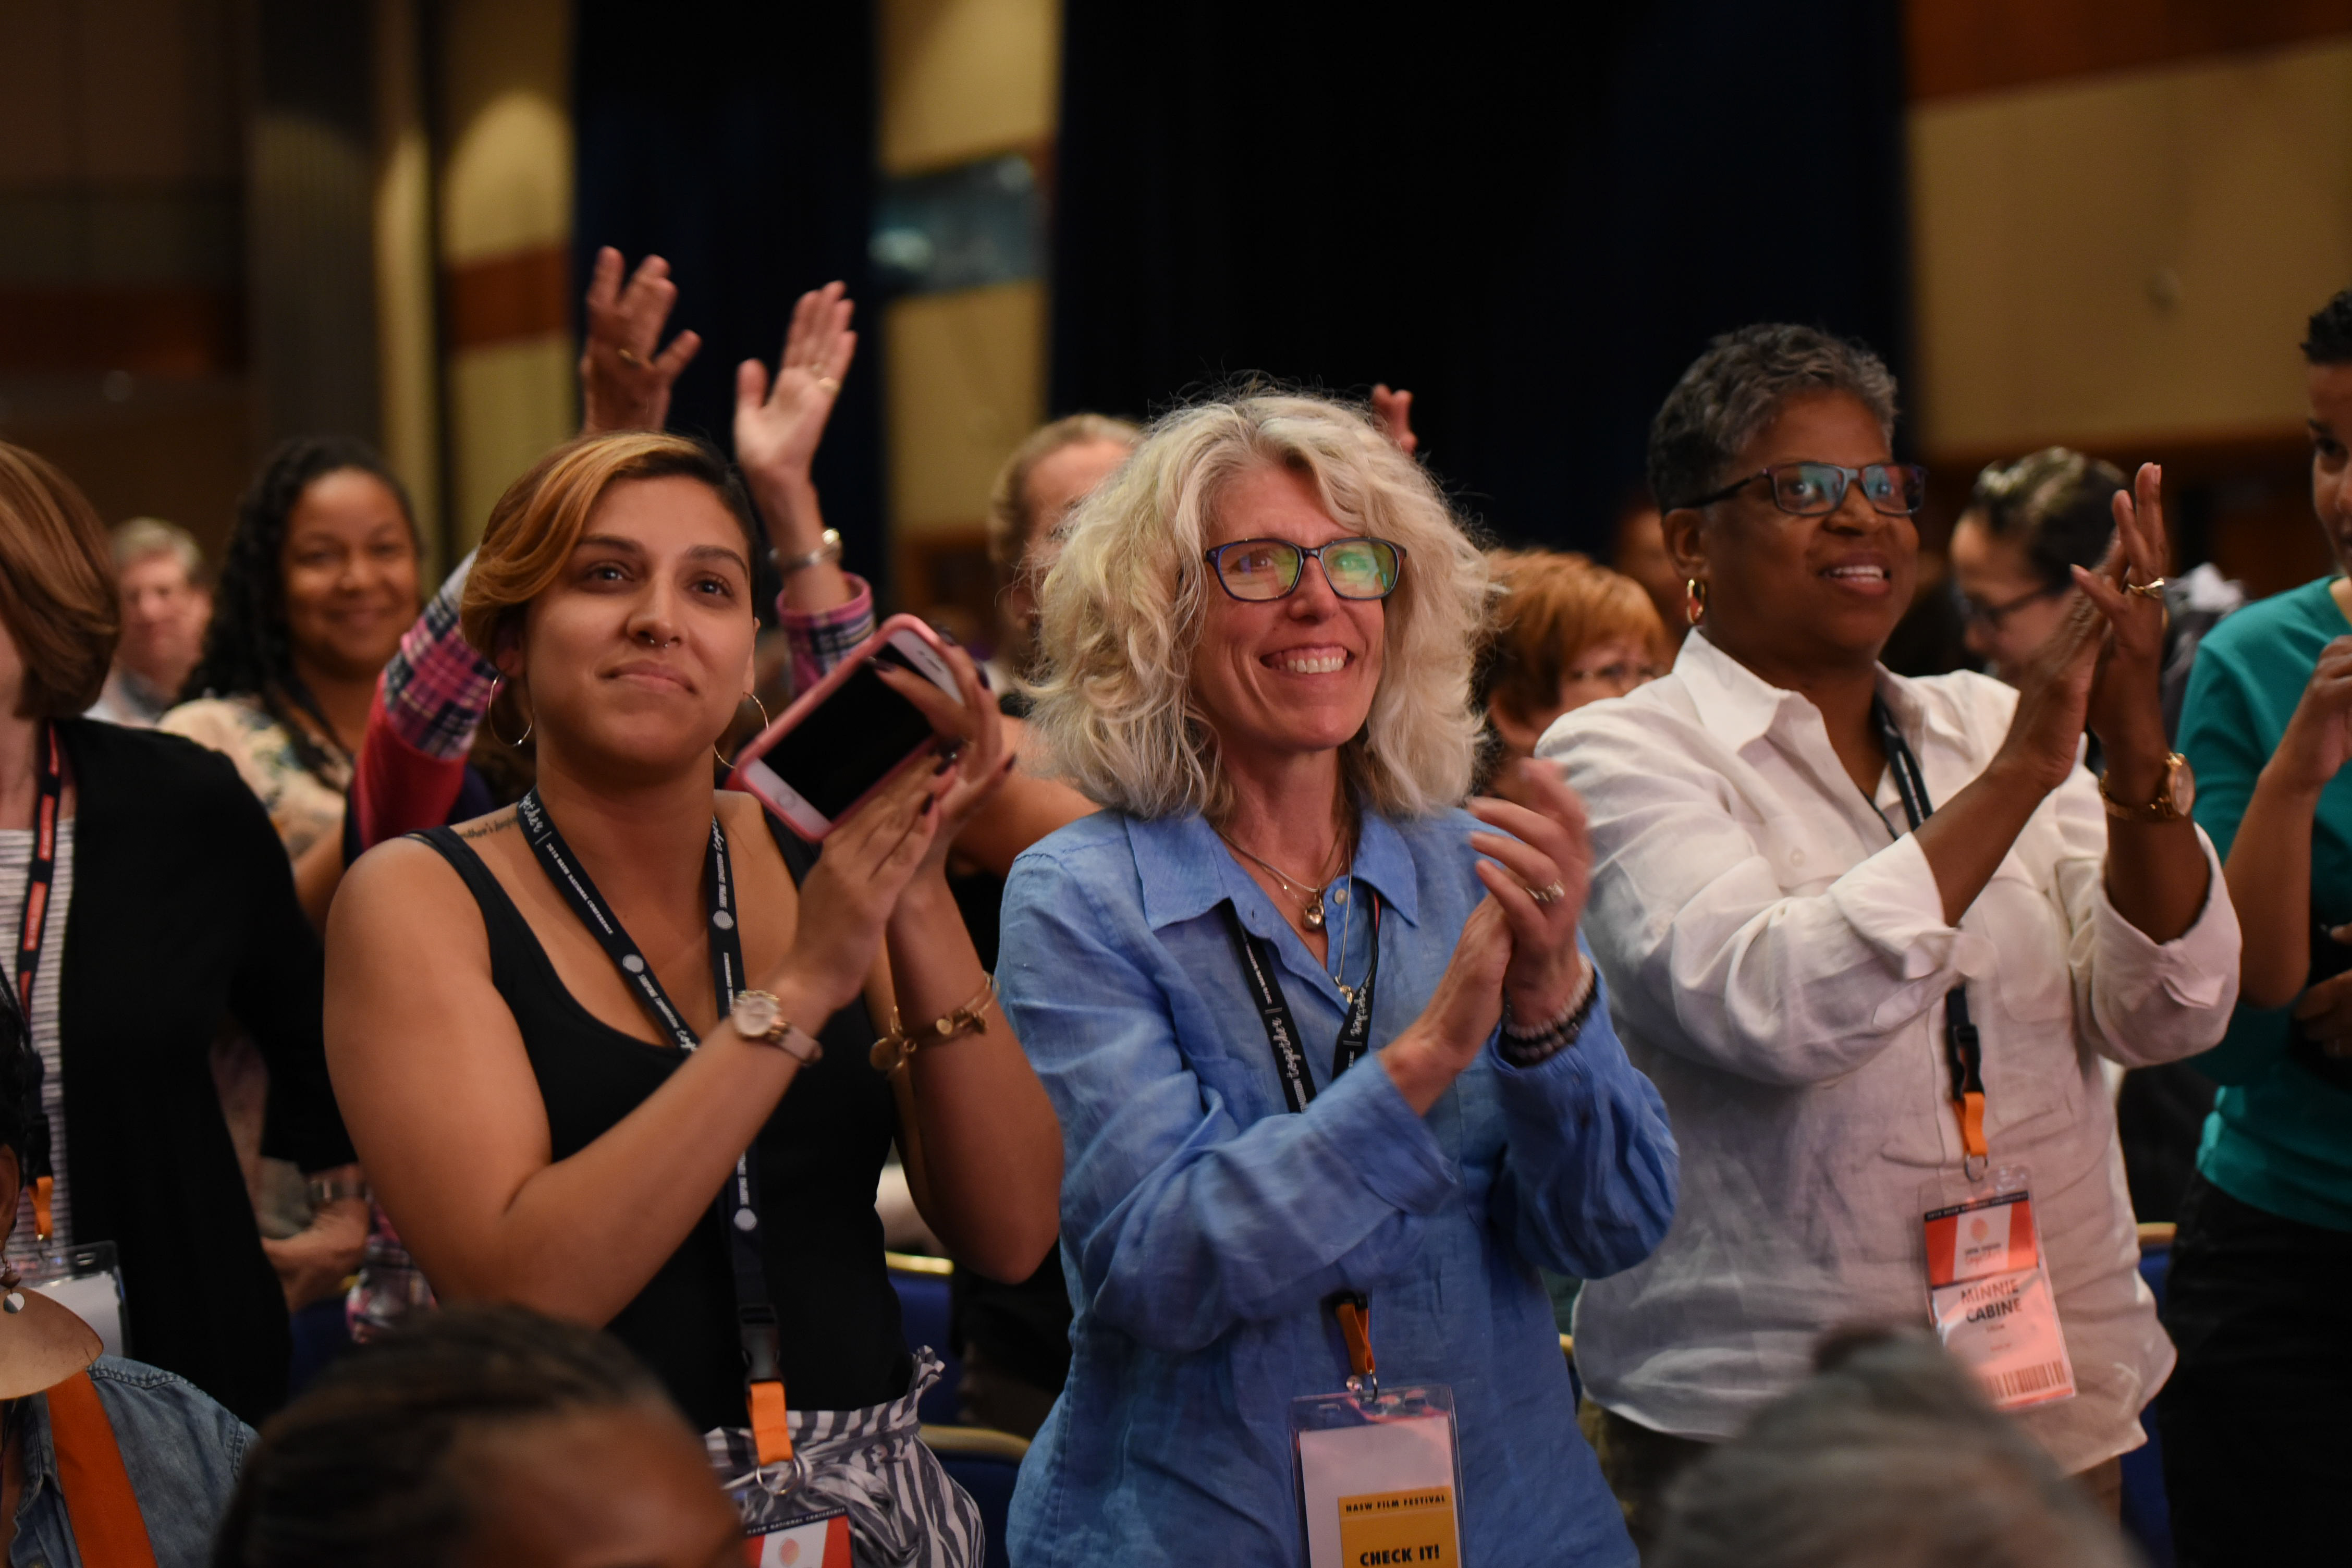 conference attendees give a standing ovation